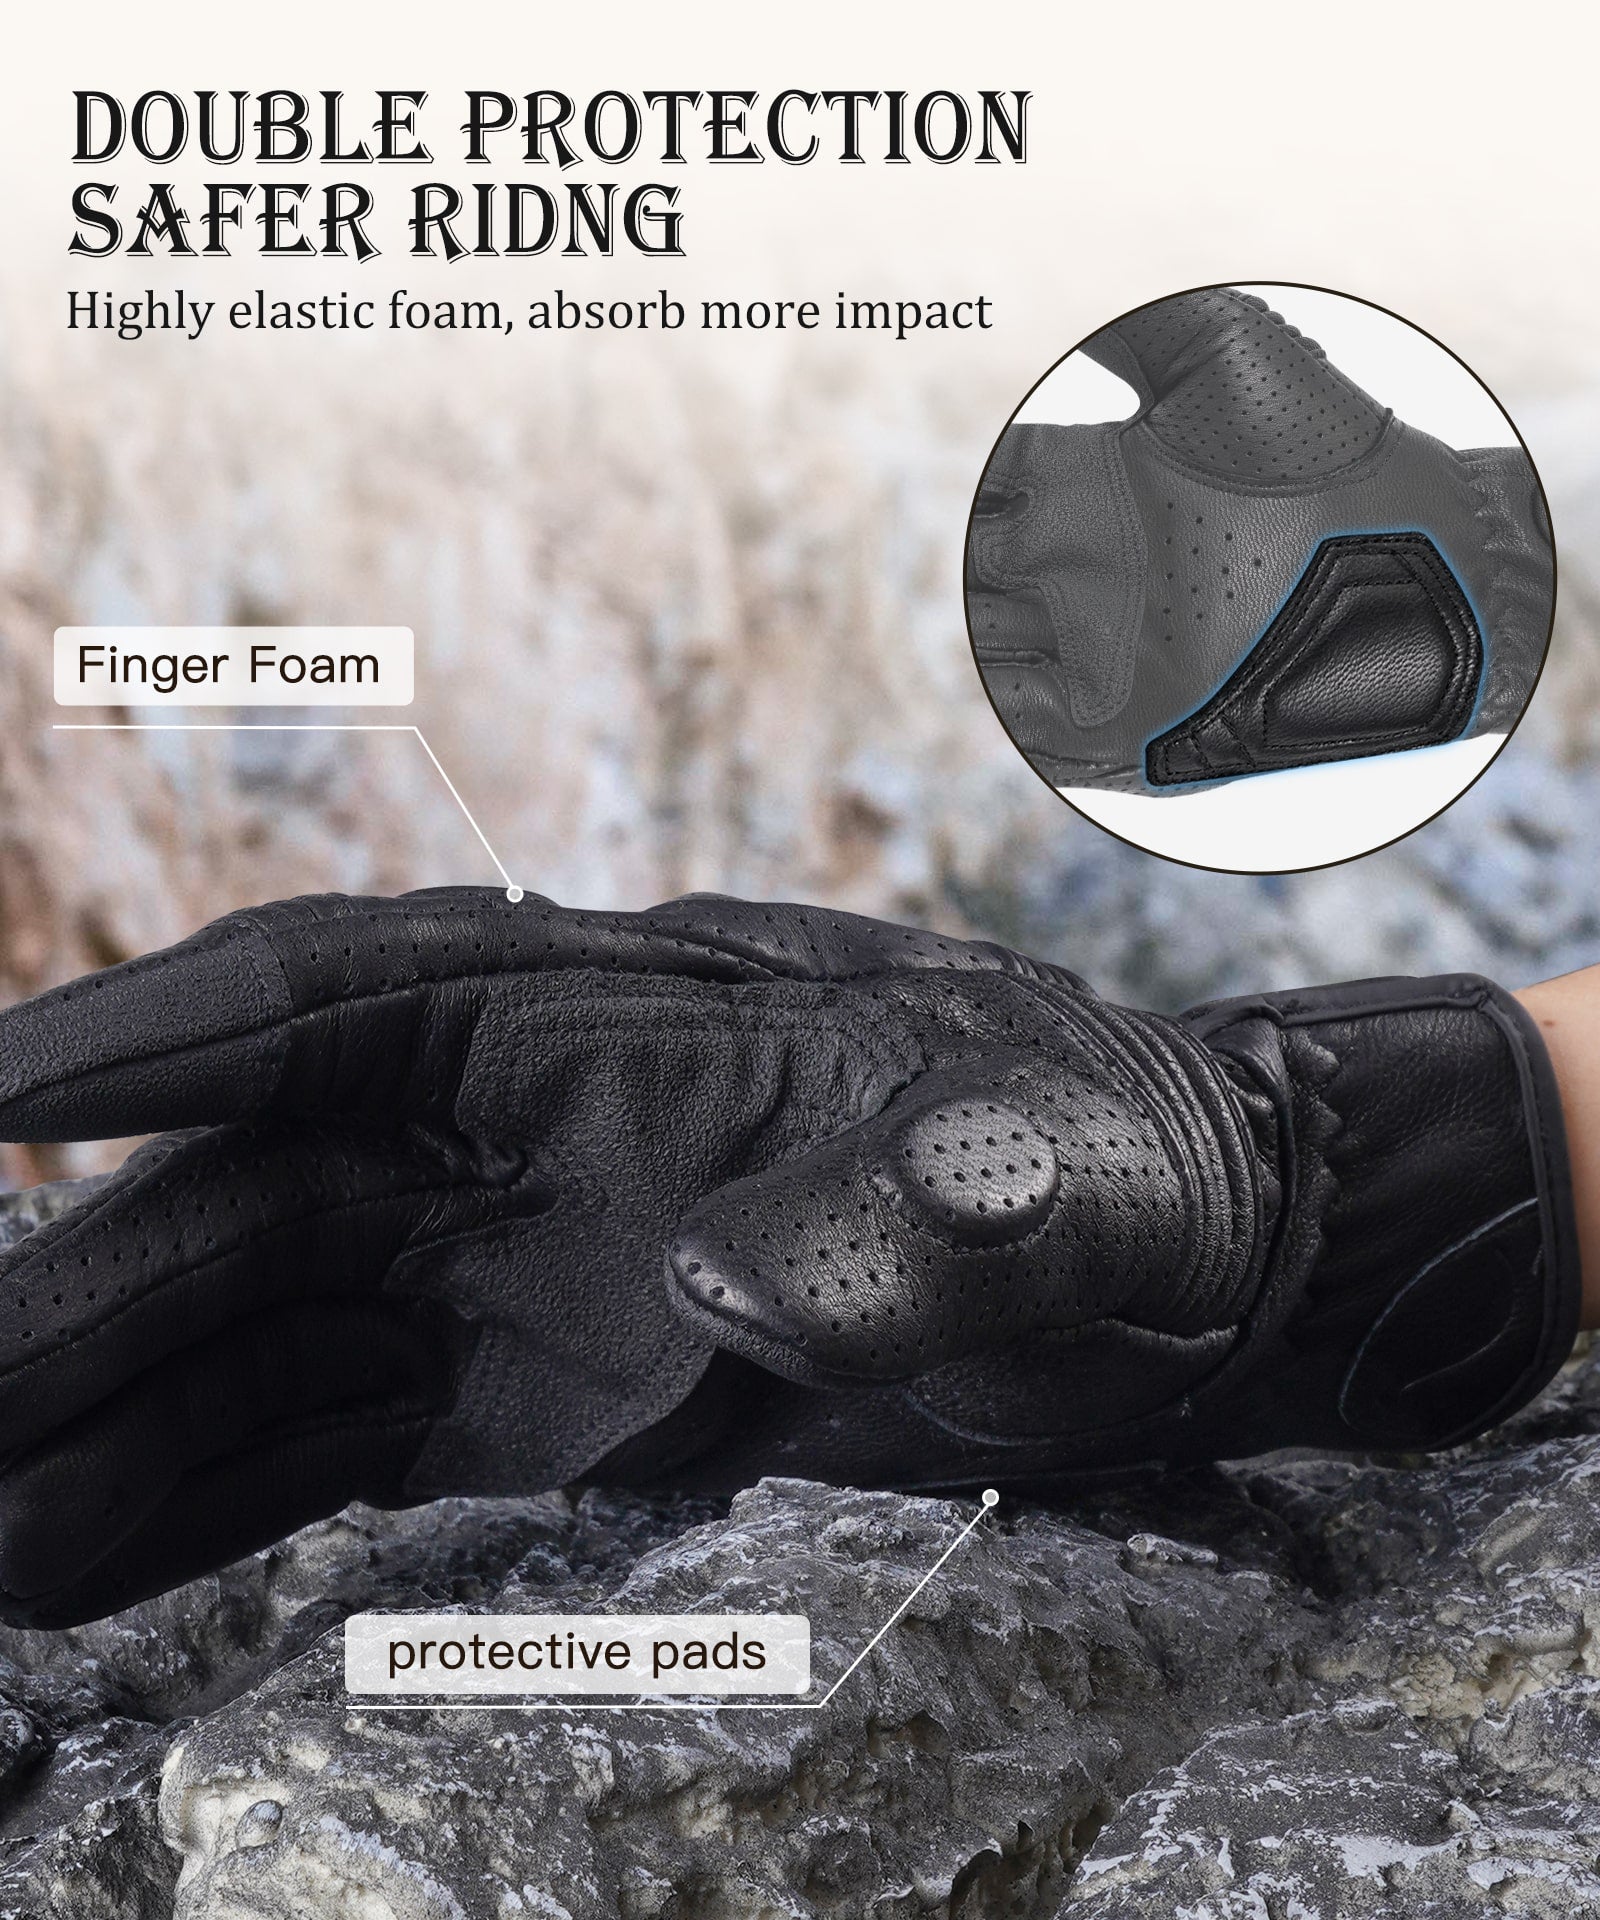 Motorcycle Goat Leather Gloves Vintage Protective Carbon Cycling Gloves Touchscreen